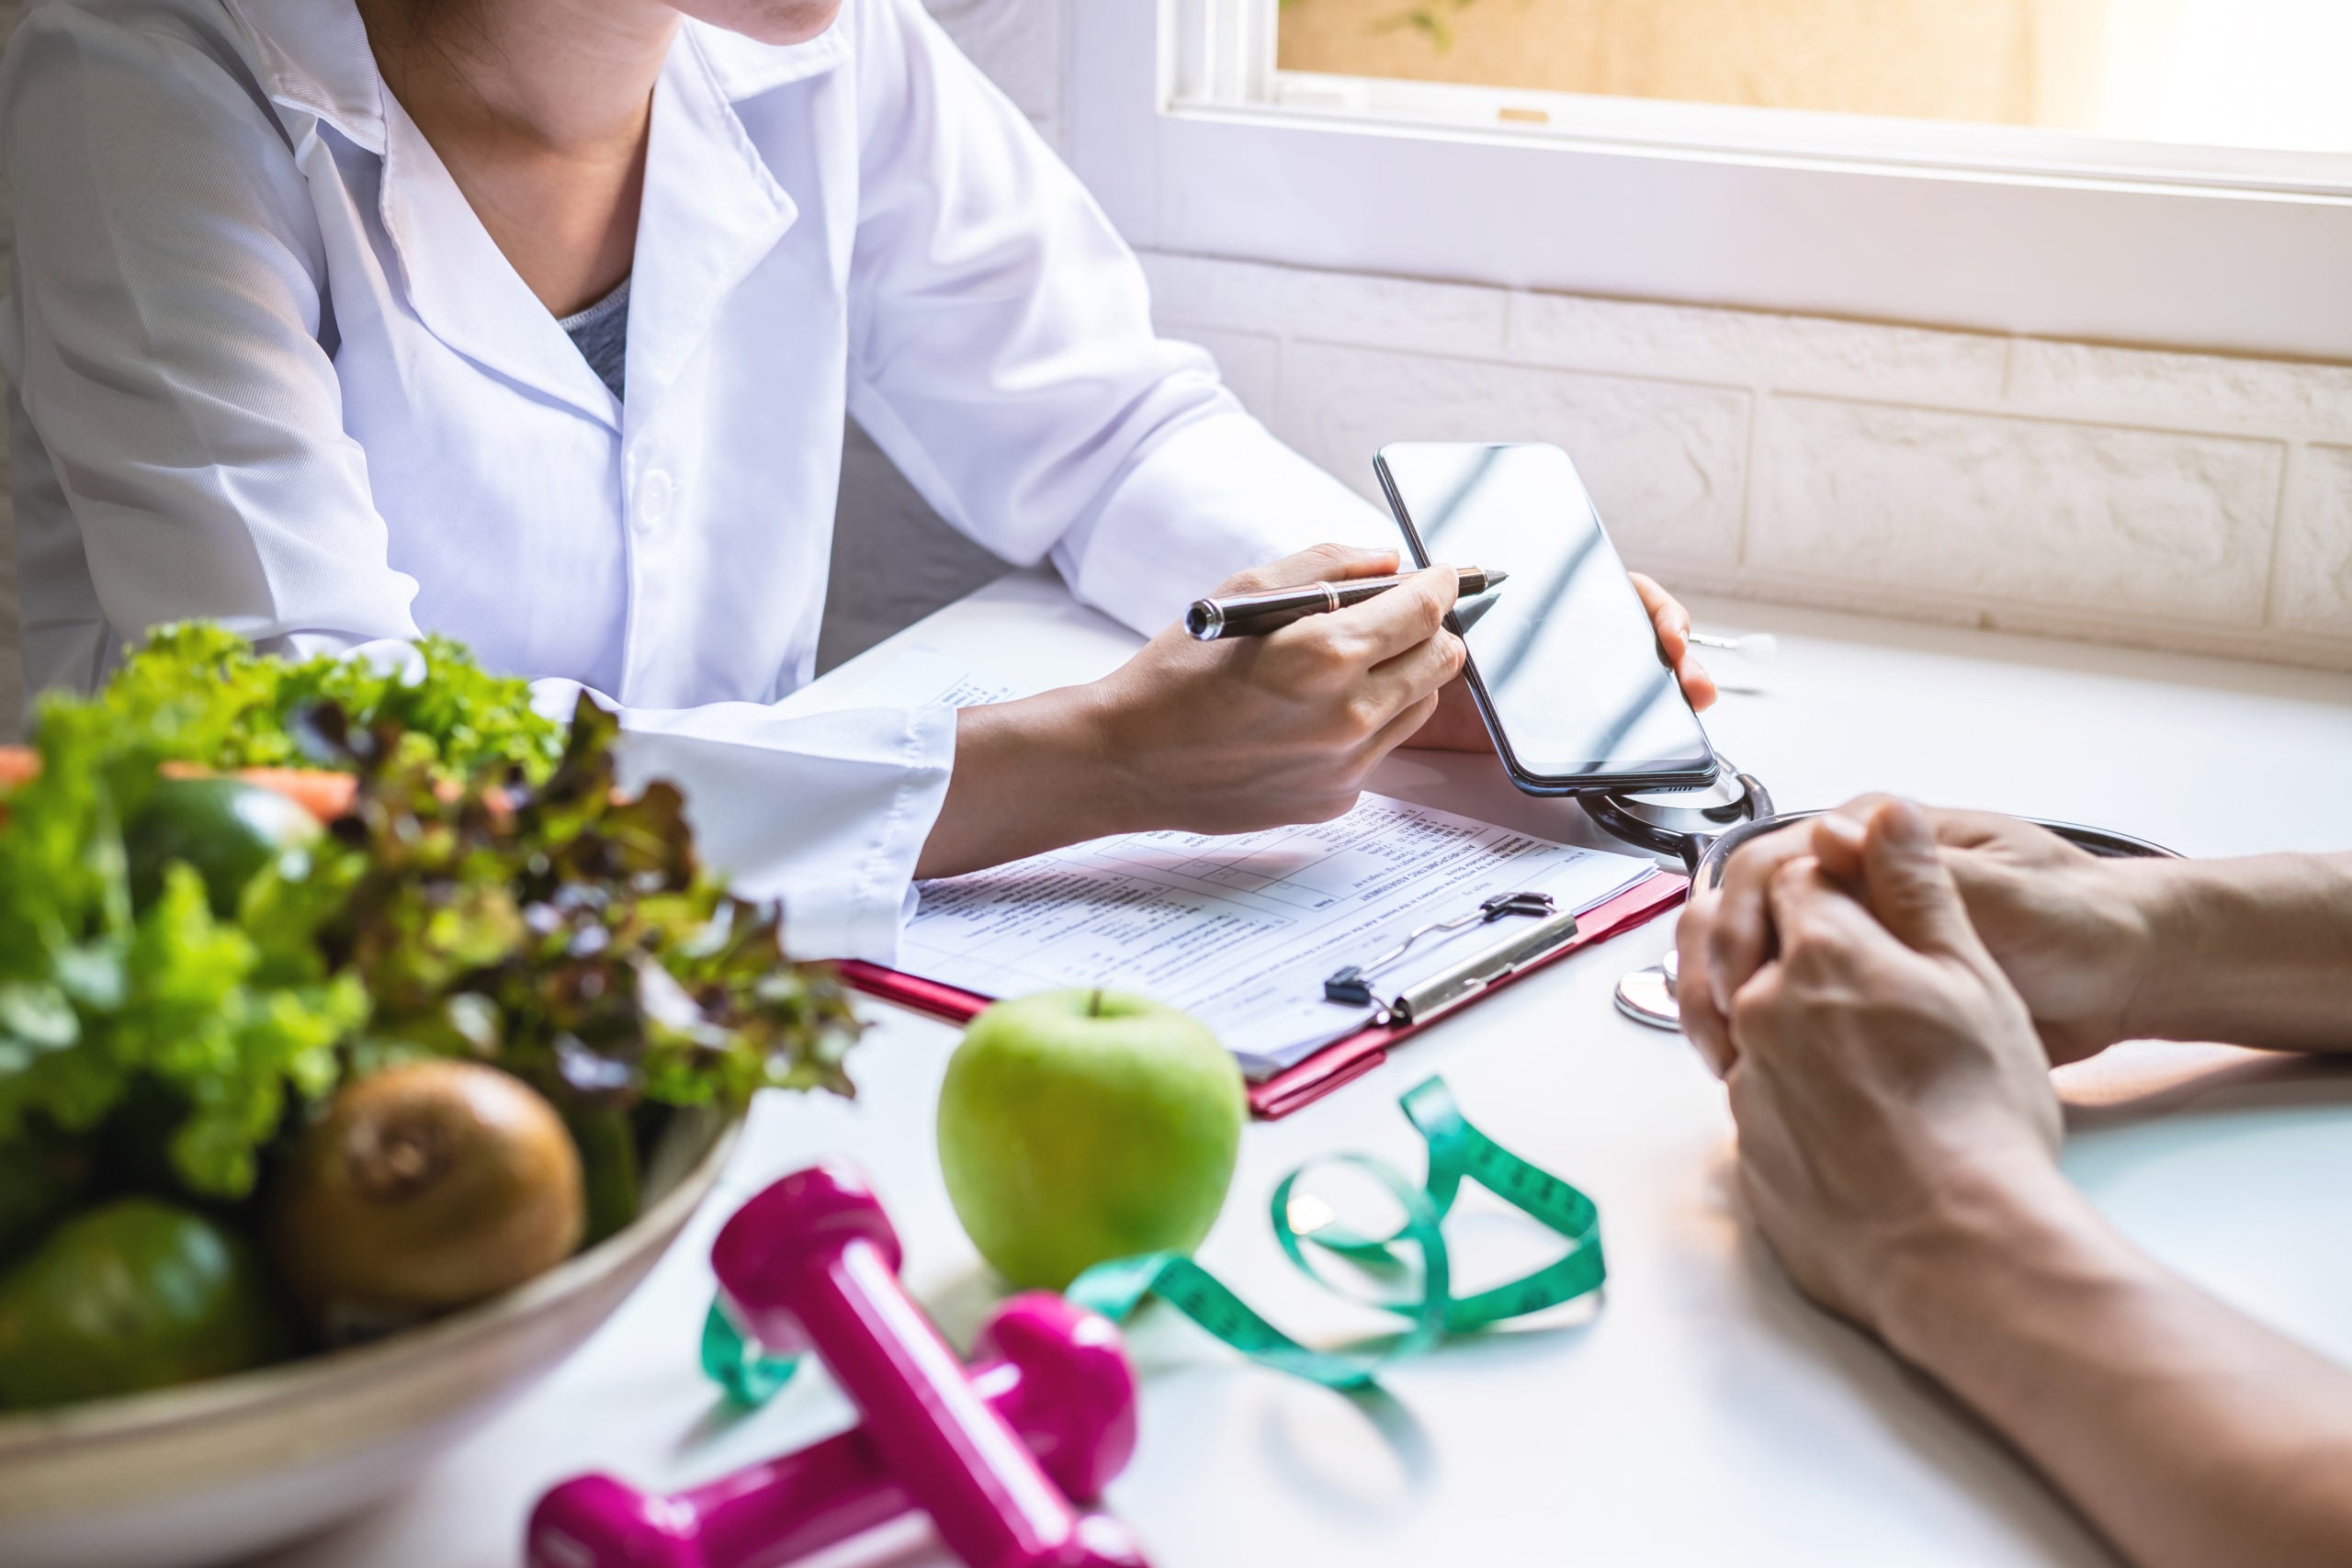 physician counseling a patient using a phone app on personalized nutrition recommendations. Sitting at a desk with various items including a bowl of vegetables, an apple, clipboard, and free weights